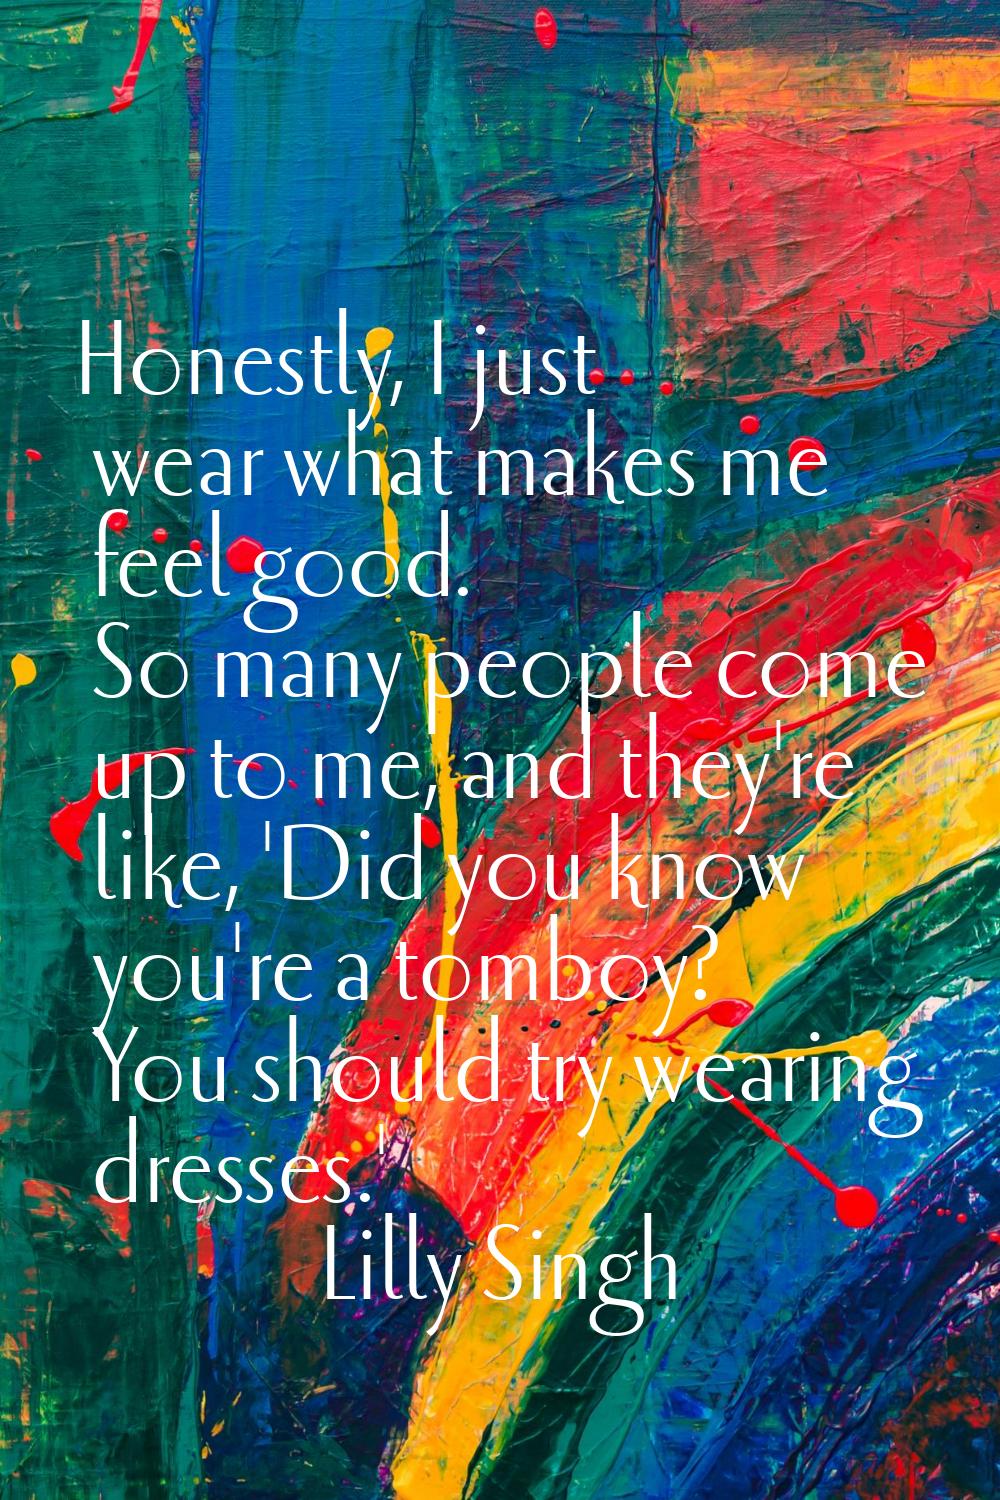 Honestly, I just wear what makes me feel good. So many people come up to me, and they're like, 'Did